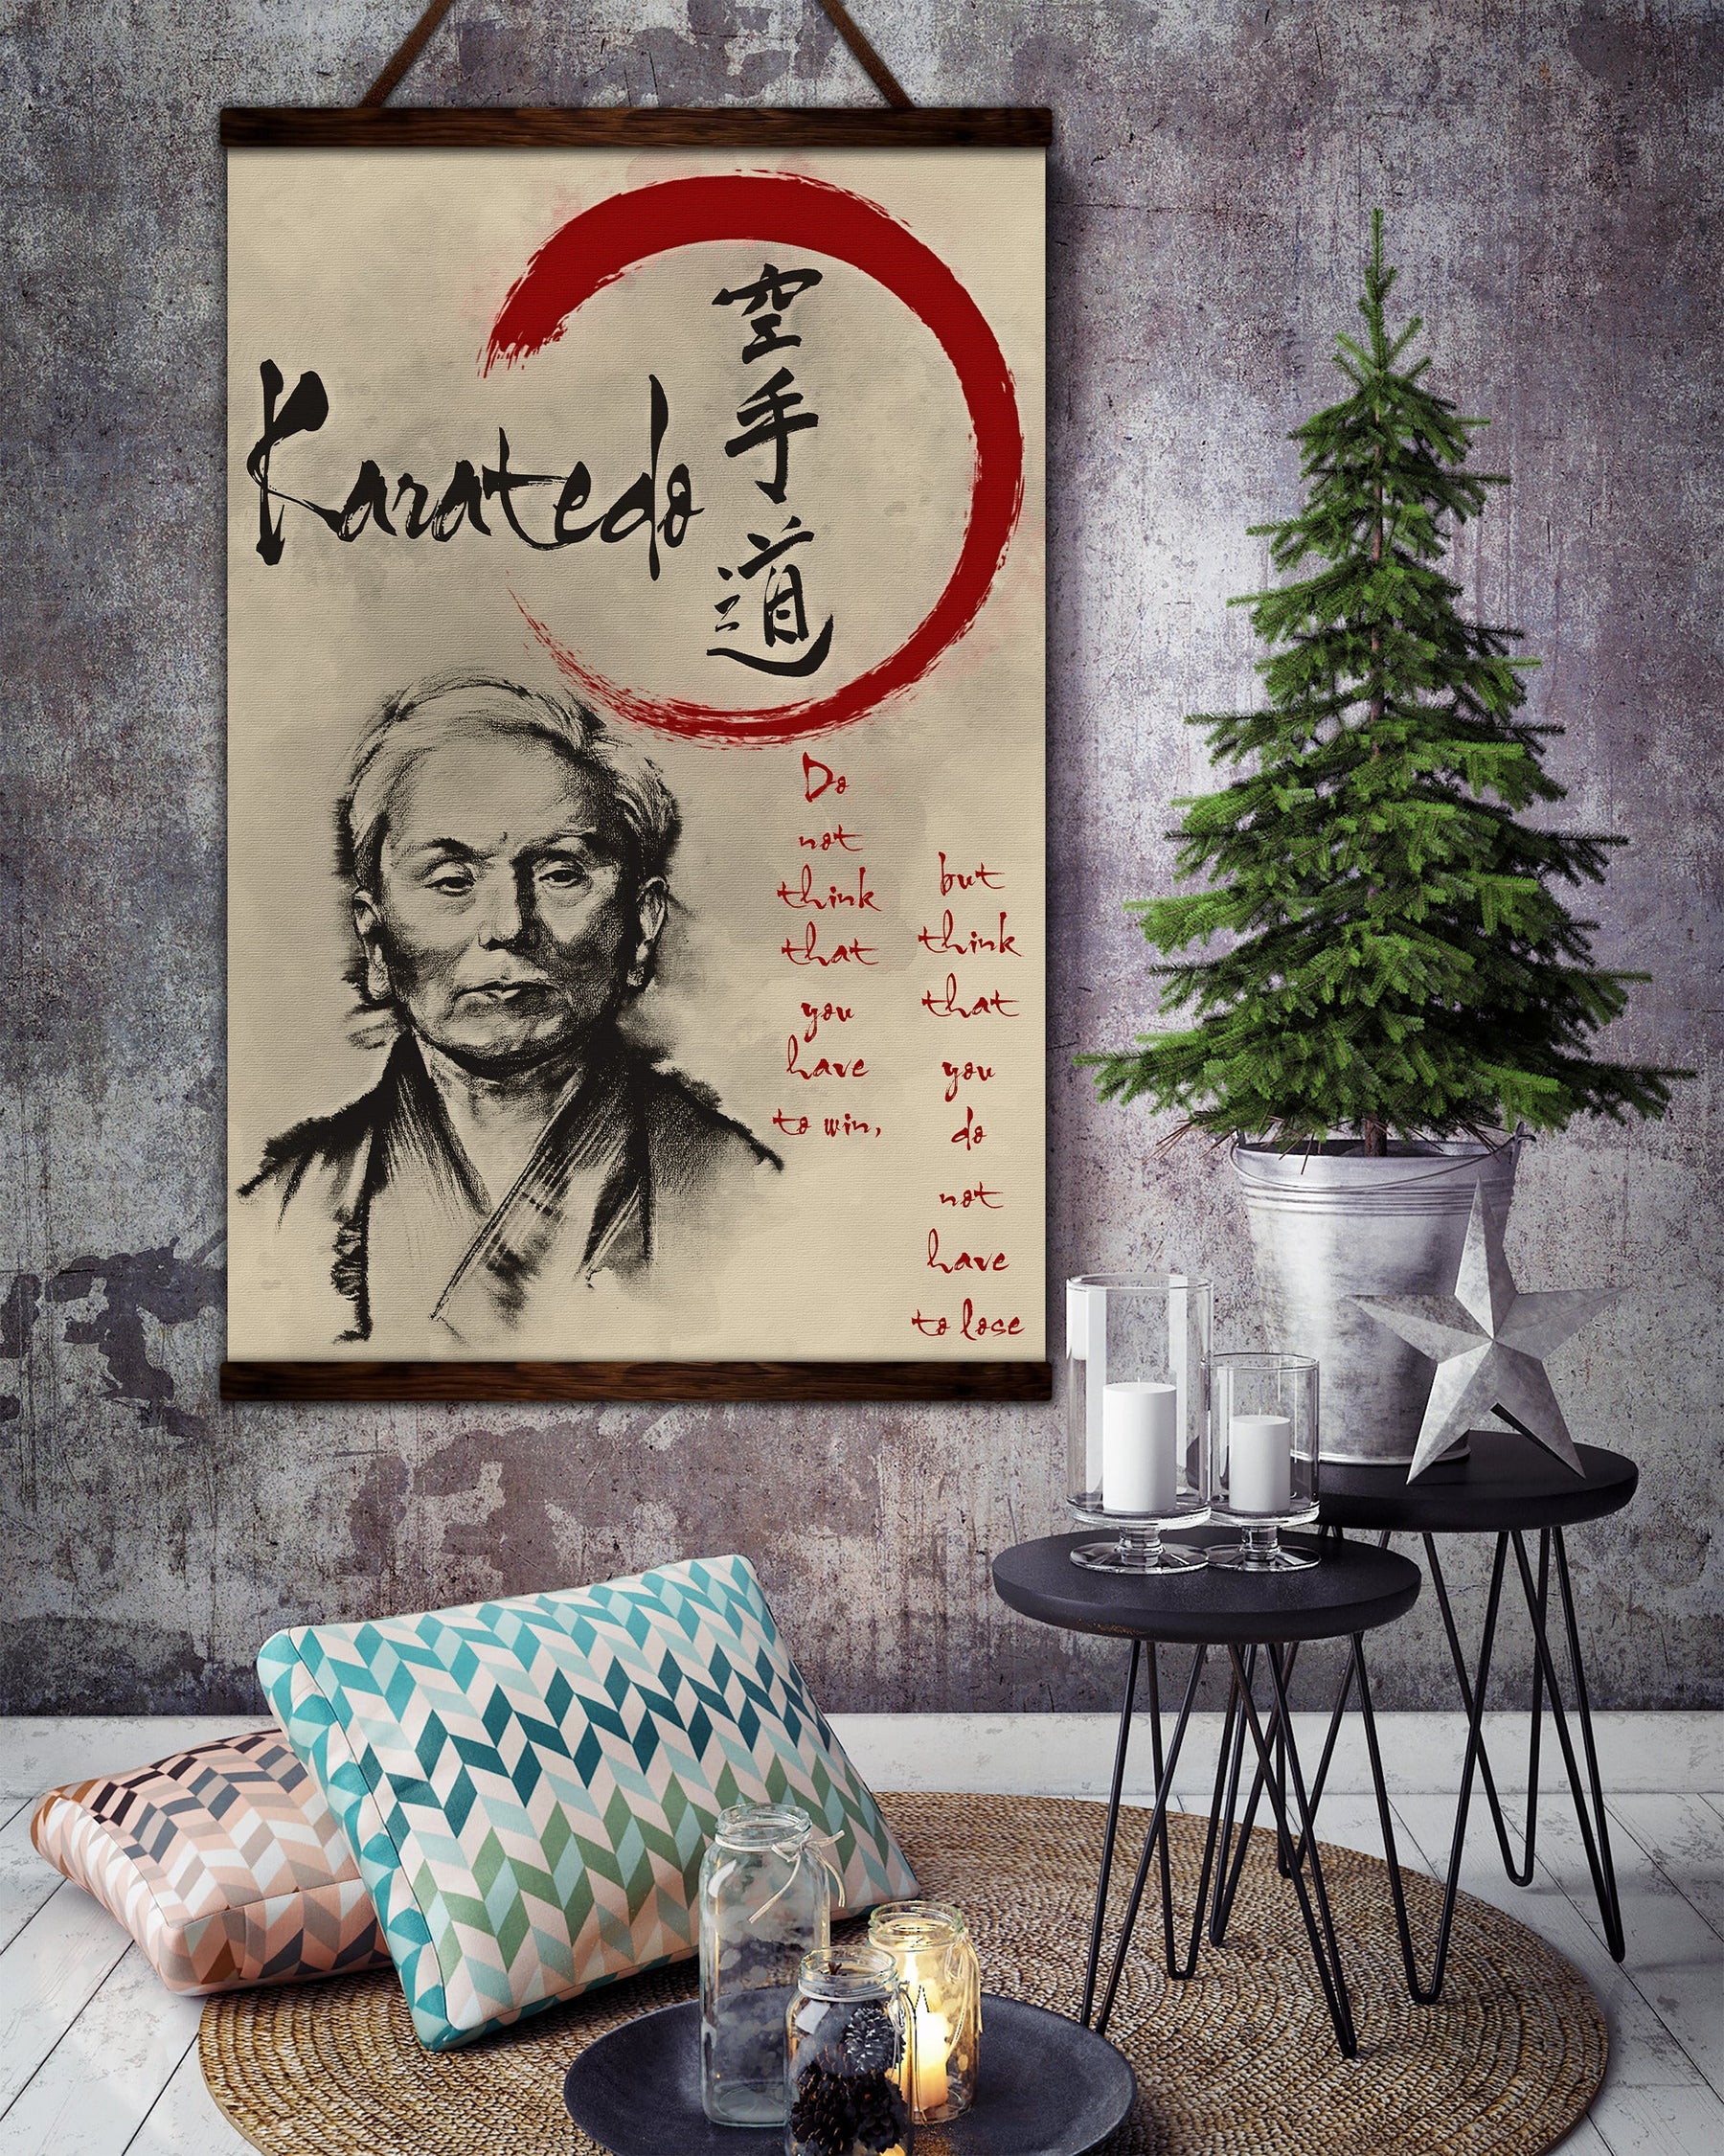 KA003 - Do Not Think That You Have To Win -  Gichin Funakoshi - Vertical Poster - Vertical Canvas - Karate Poster